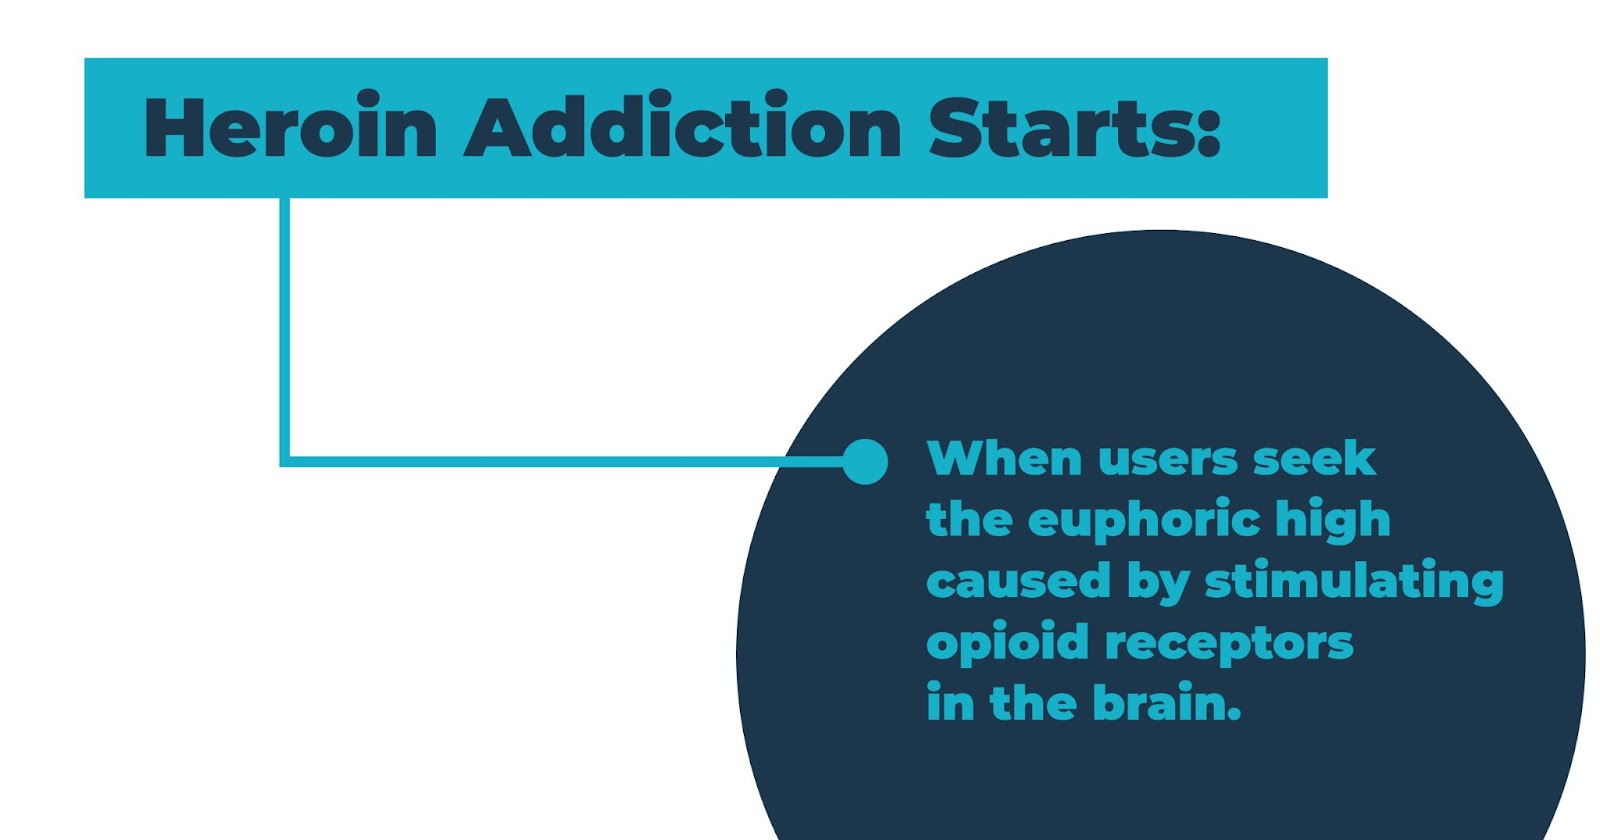 Heroin addiction starts when users seek the euphoric high caused by stimulating opioid receptors in the brain